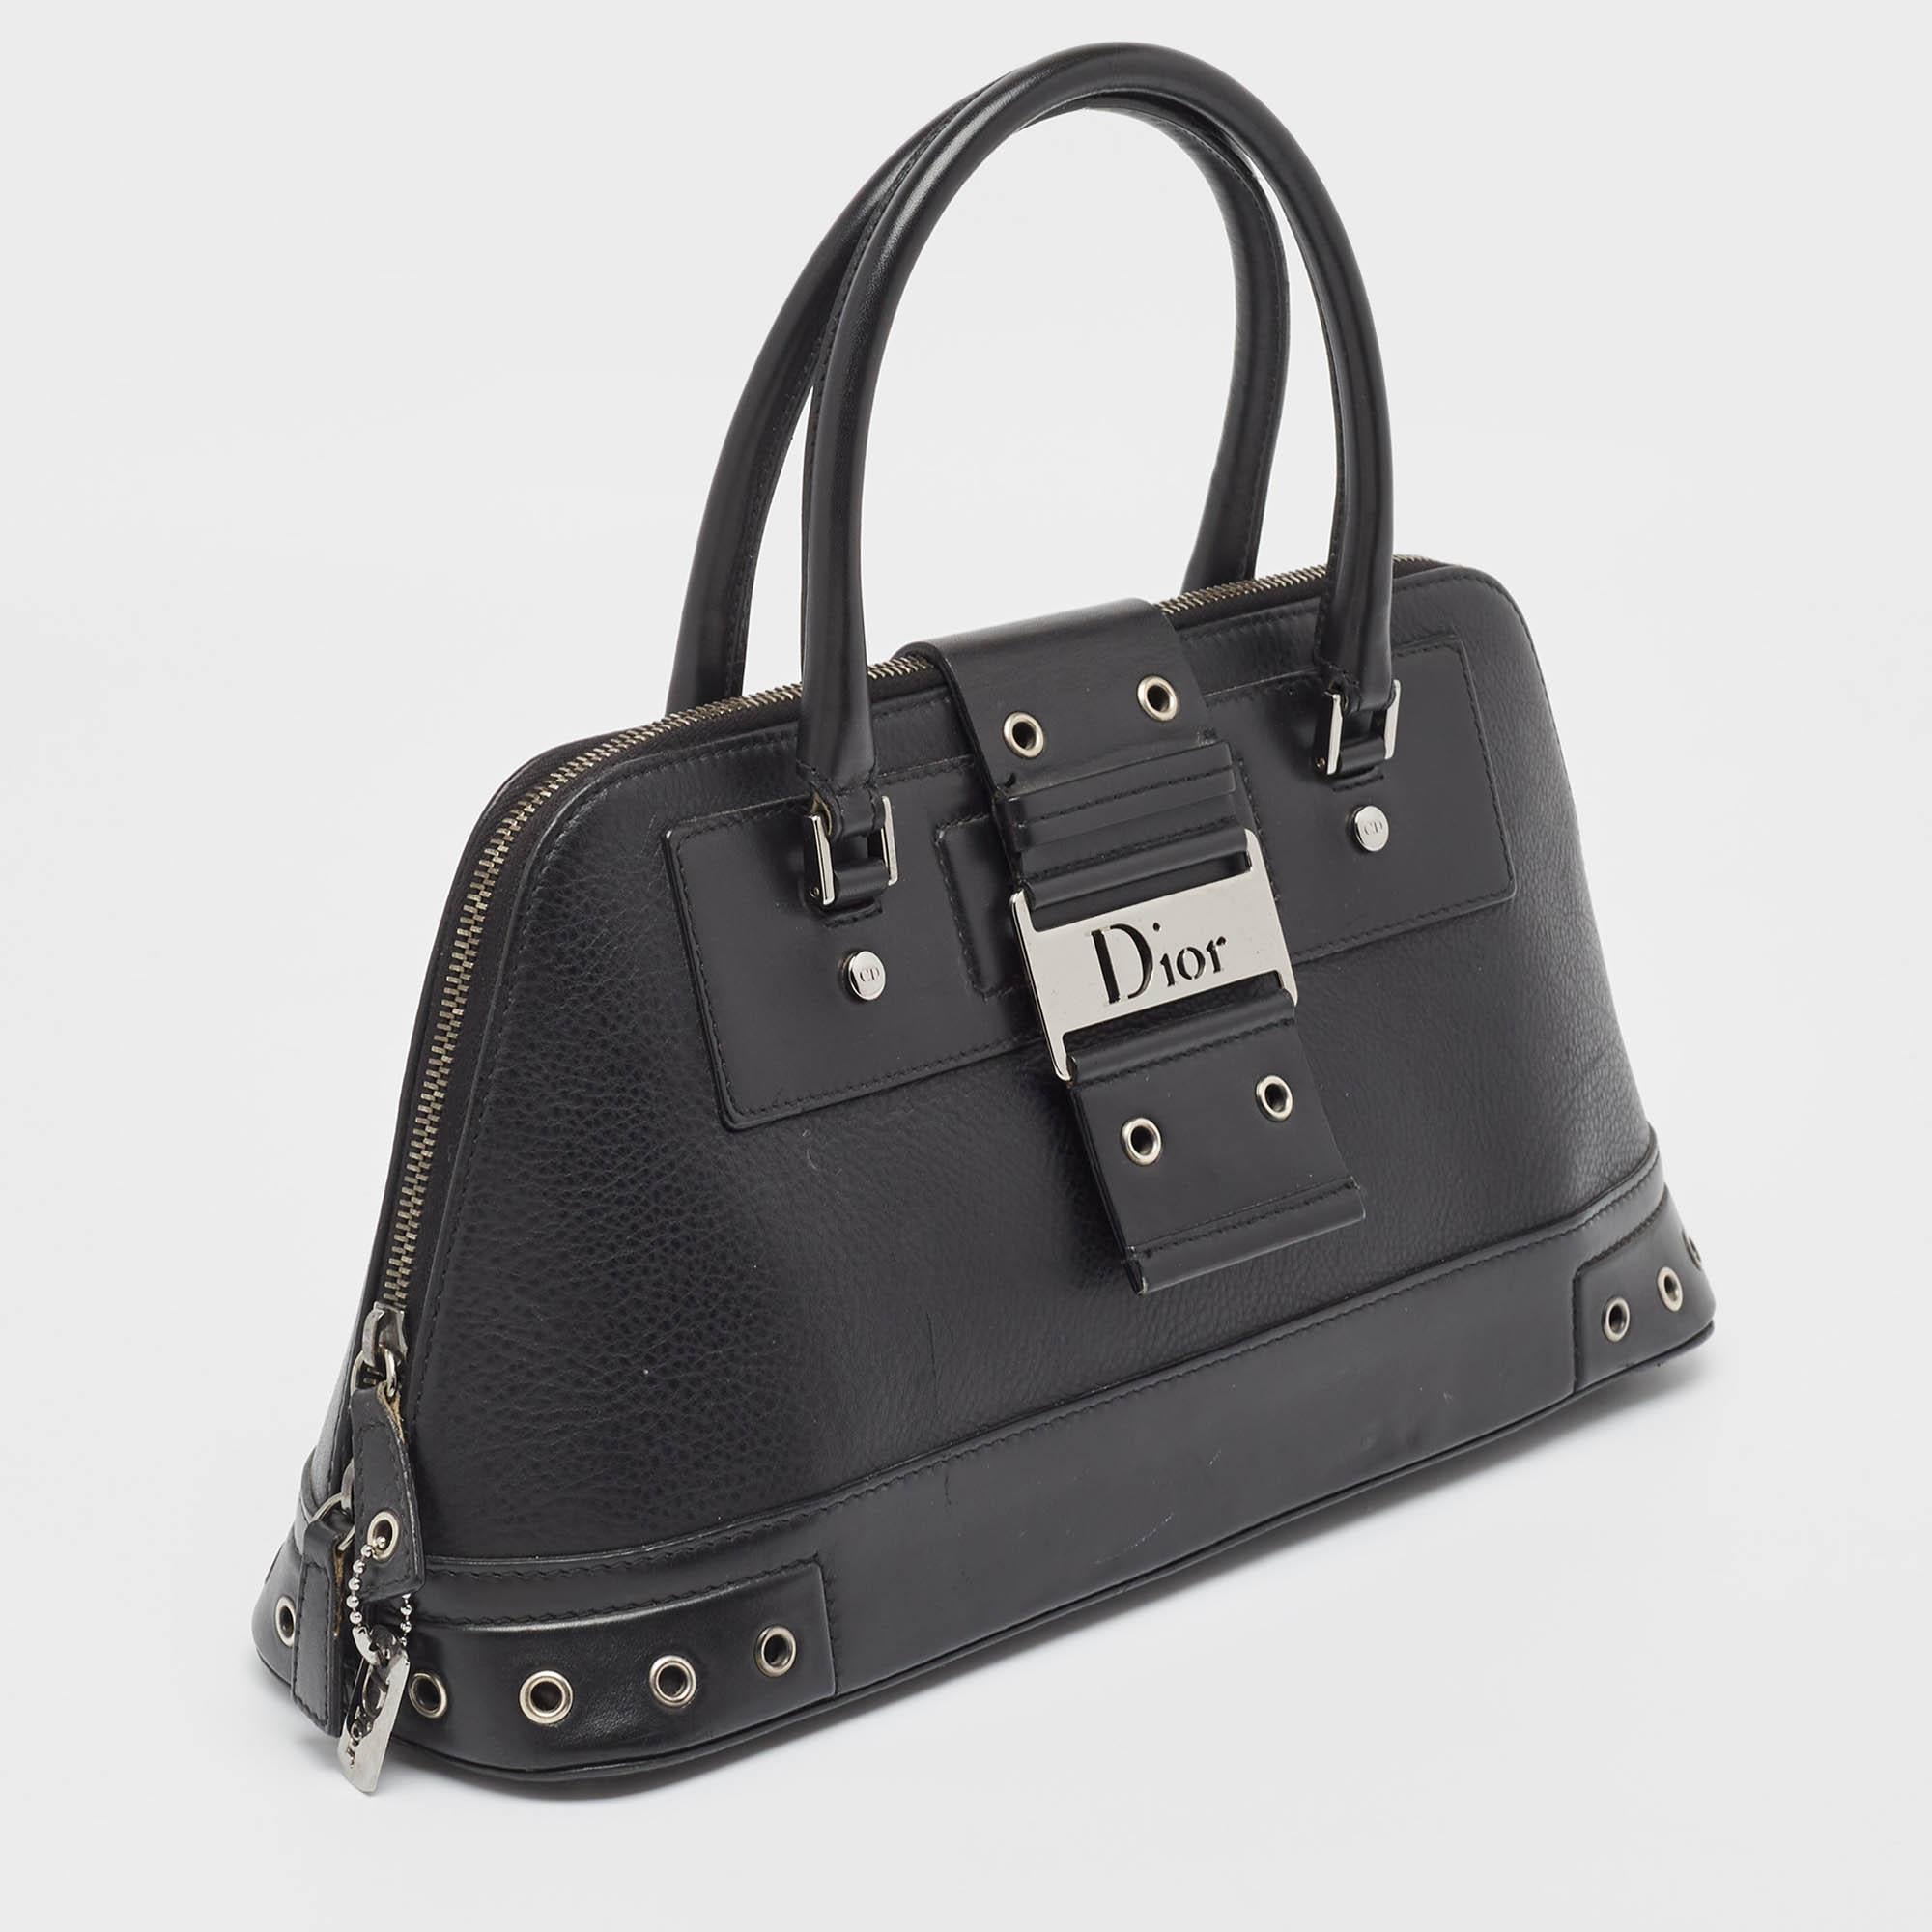 Dior Black Leather Street Chic Satchel For Sale 9